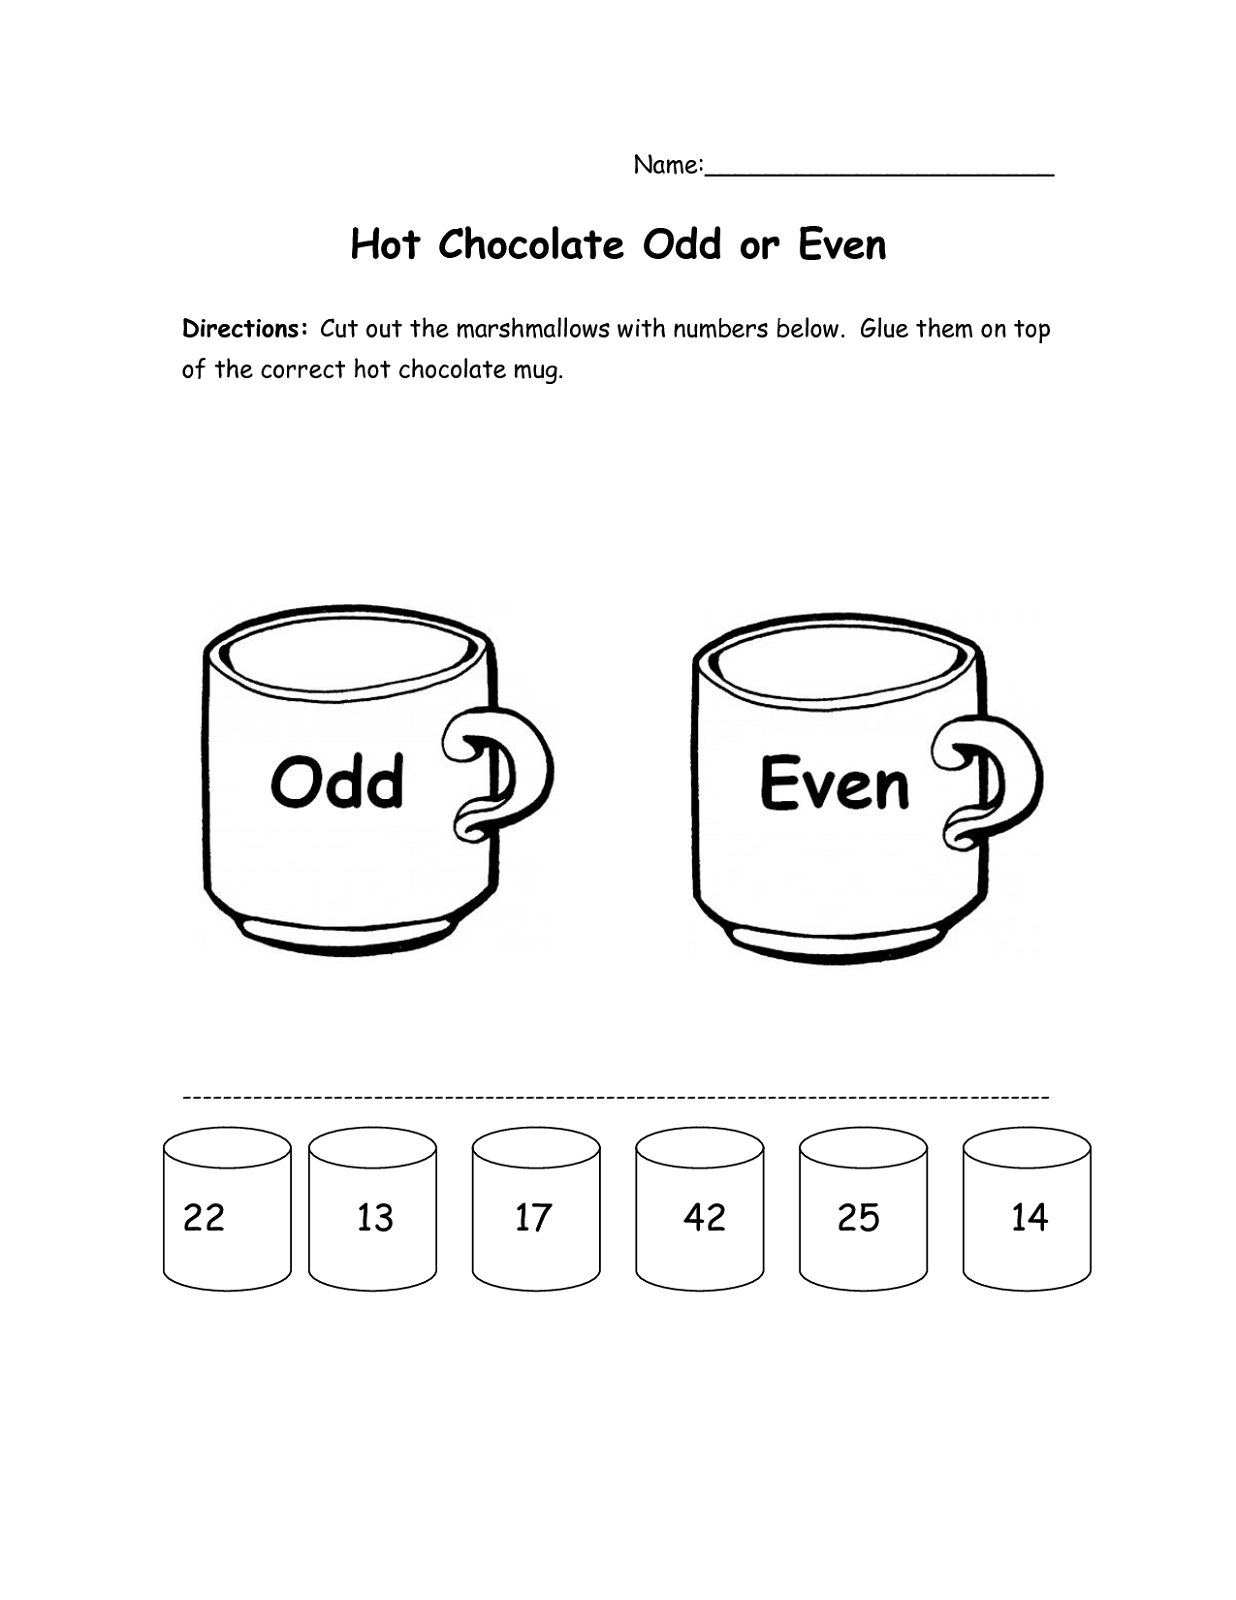 odd-and-even-numbers-worksheets-marshmallow